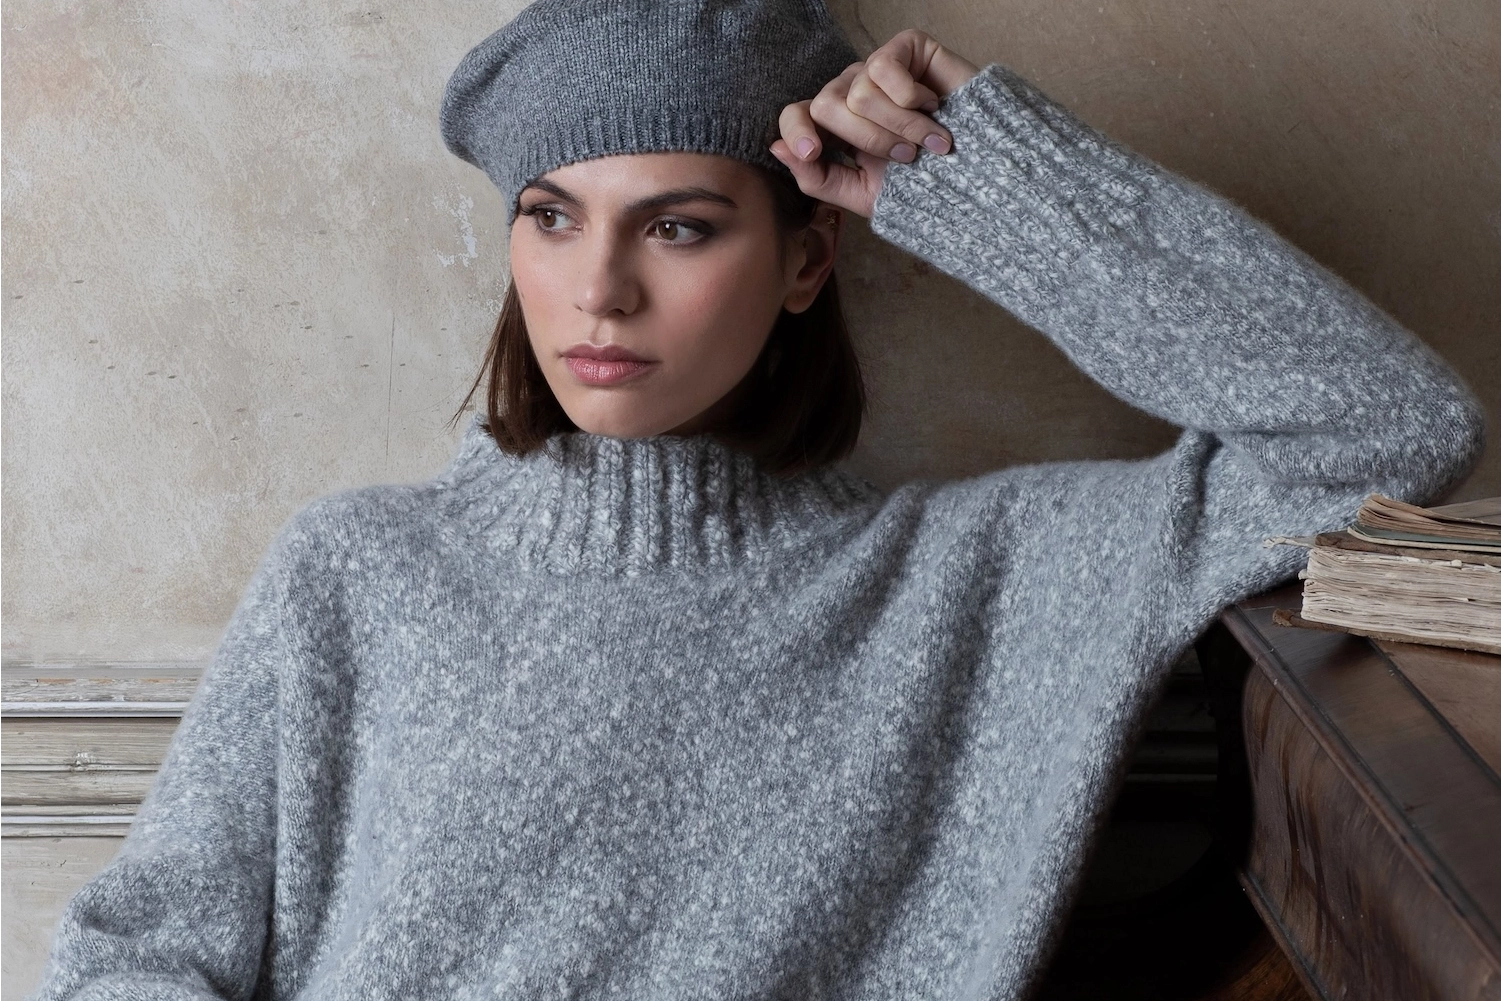 luxury cashmere sweater investment piece in grey